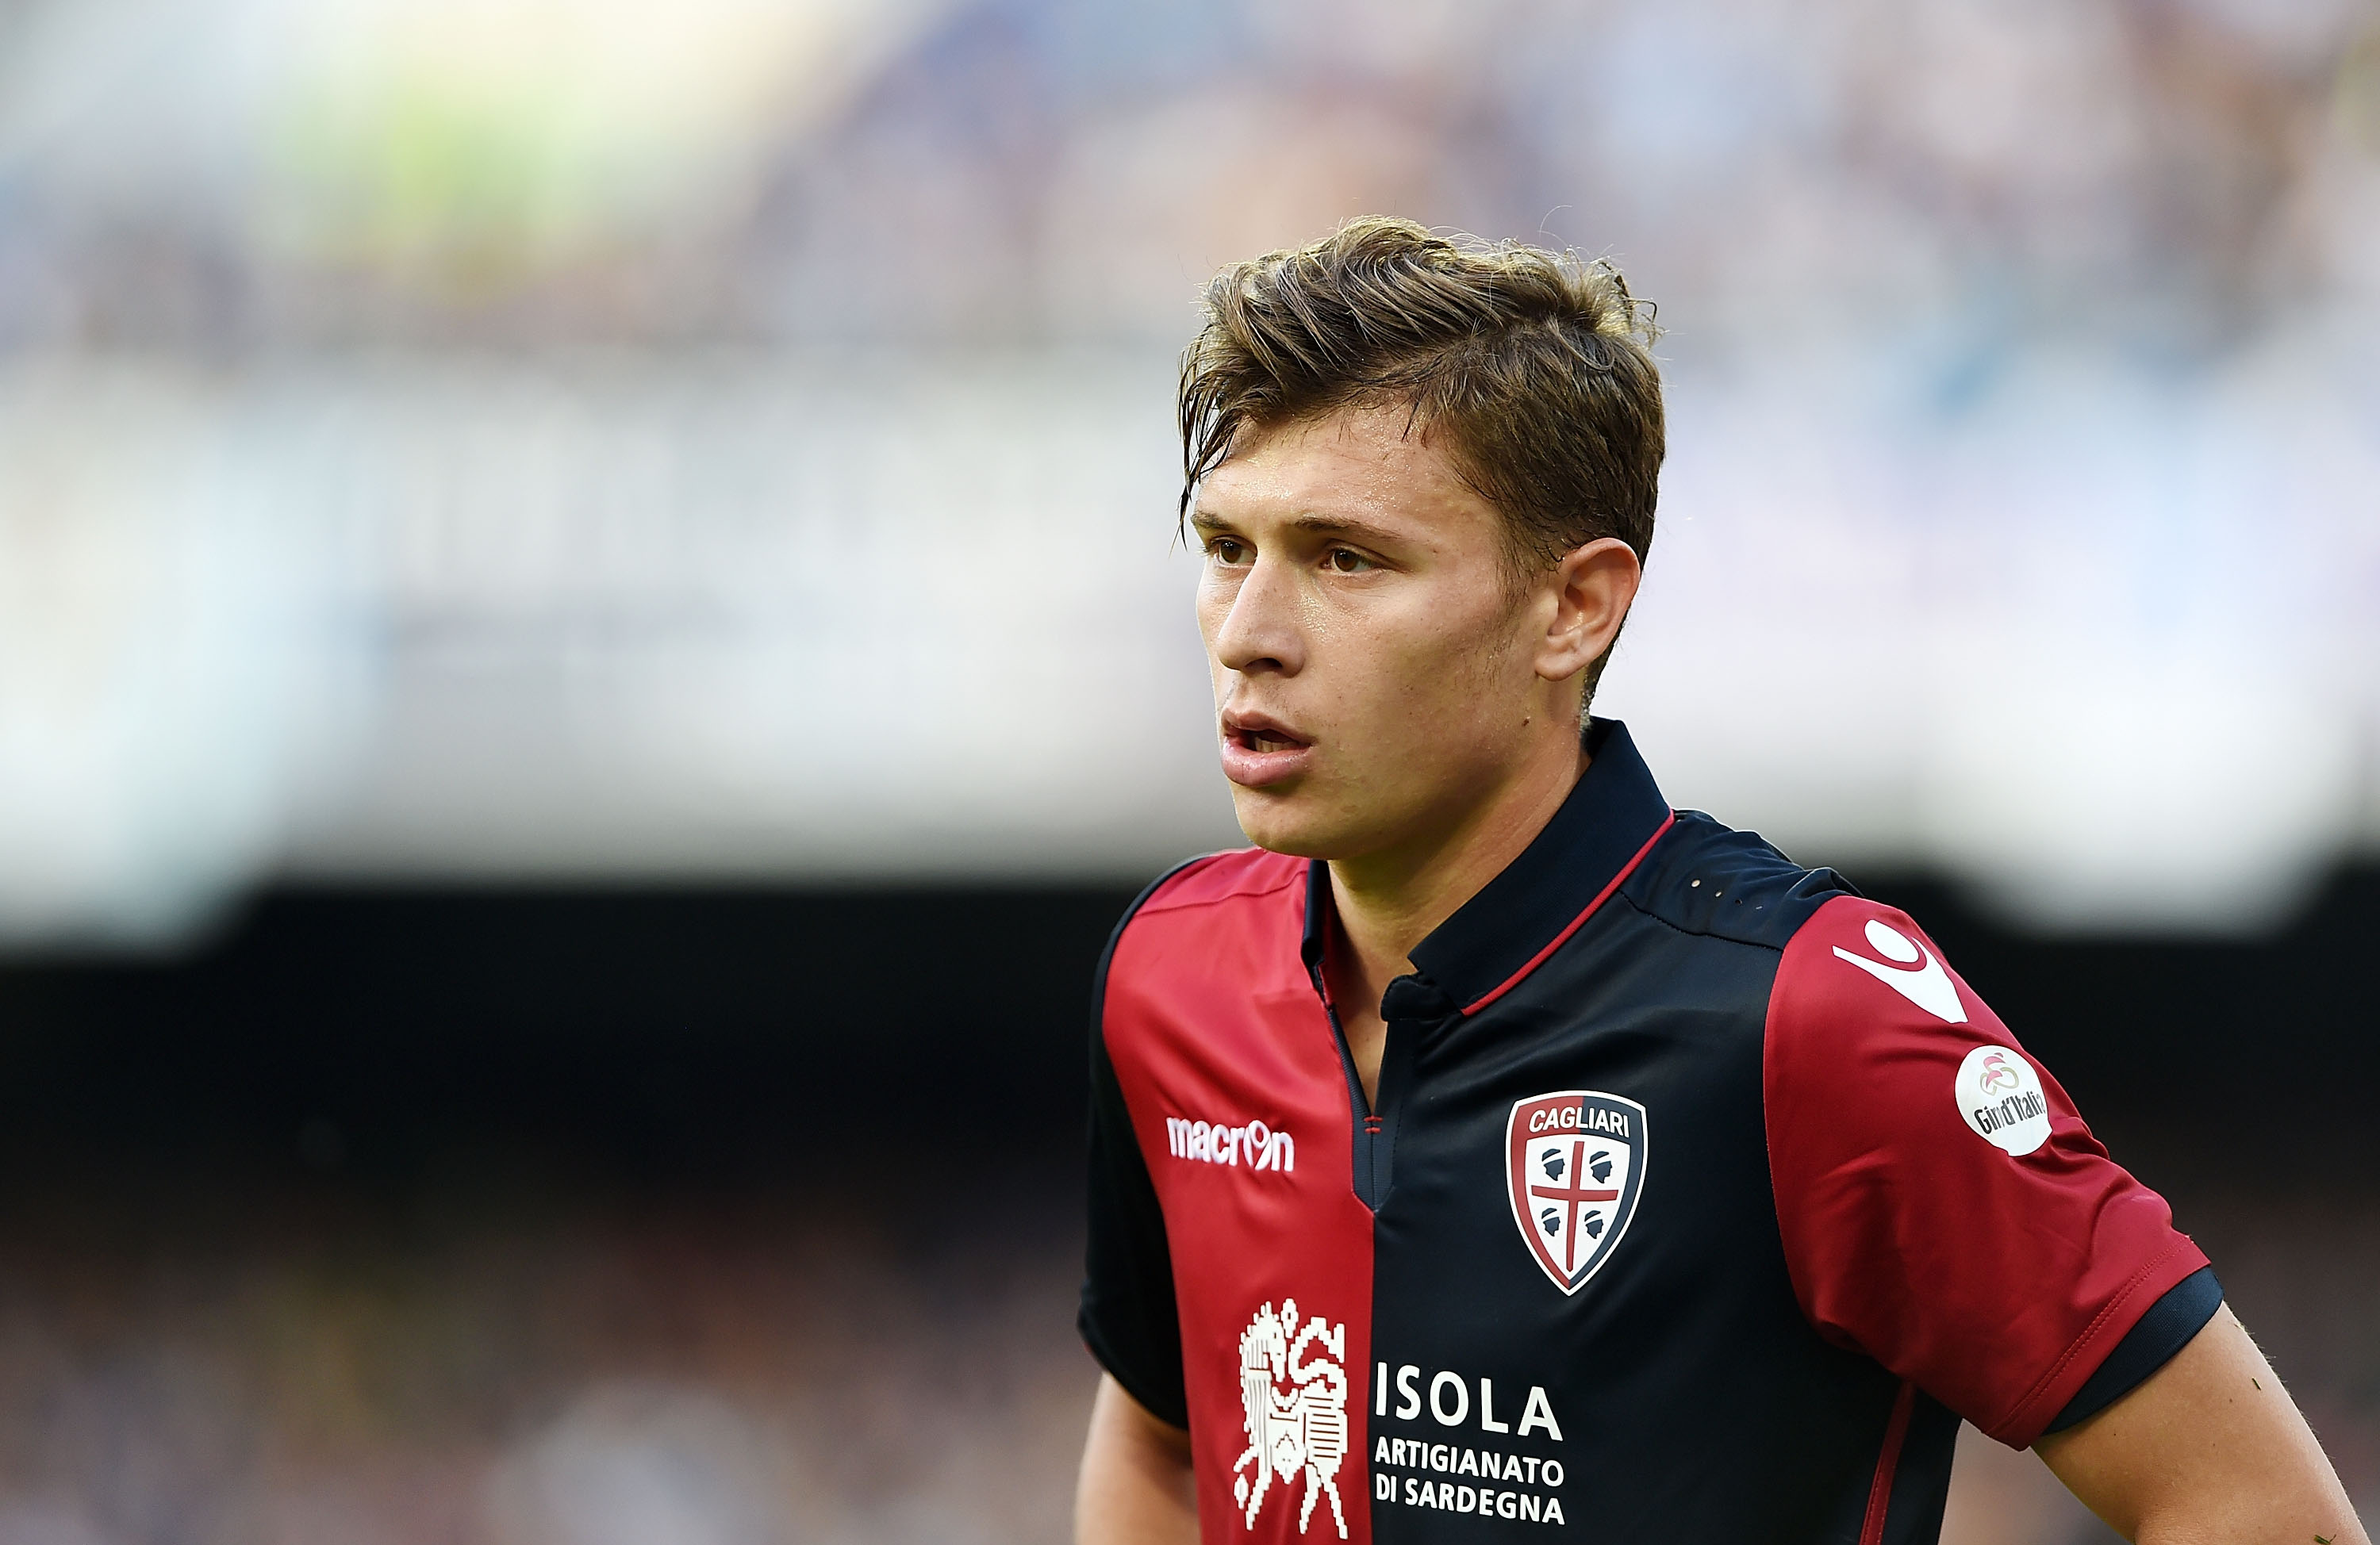 NAPLES, ITALY - MAY 06: Nicolò Barella of Cagliari Calcio in action during the Serie A match between SSC Napoli and Cagliari Calcio at Stadio San Paolo on May 6, 2017 in Naples, Italy.  (Photo by Francesco Pecoraro/Getty Images)